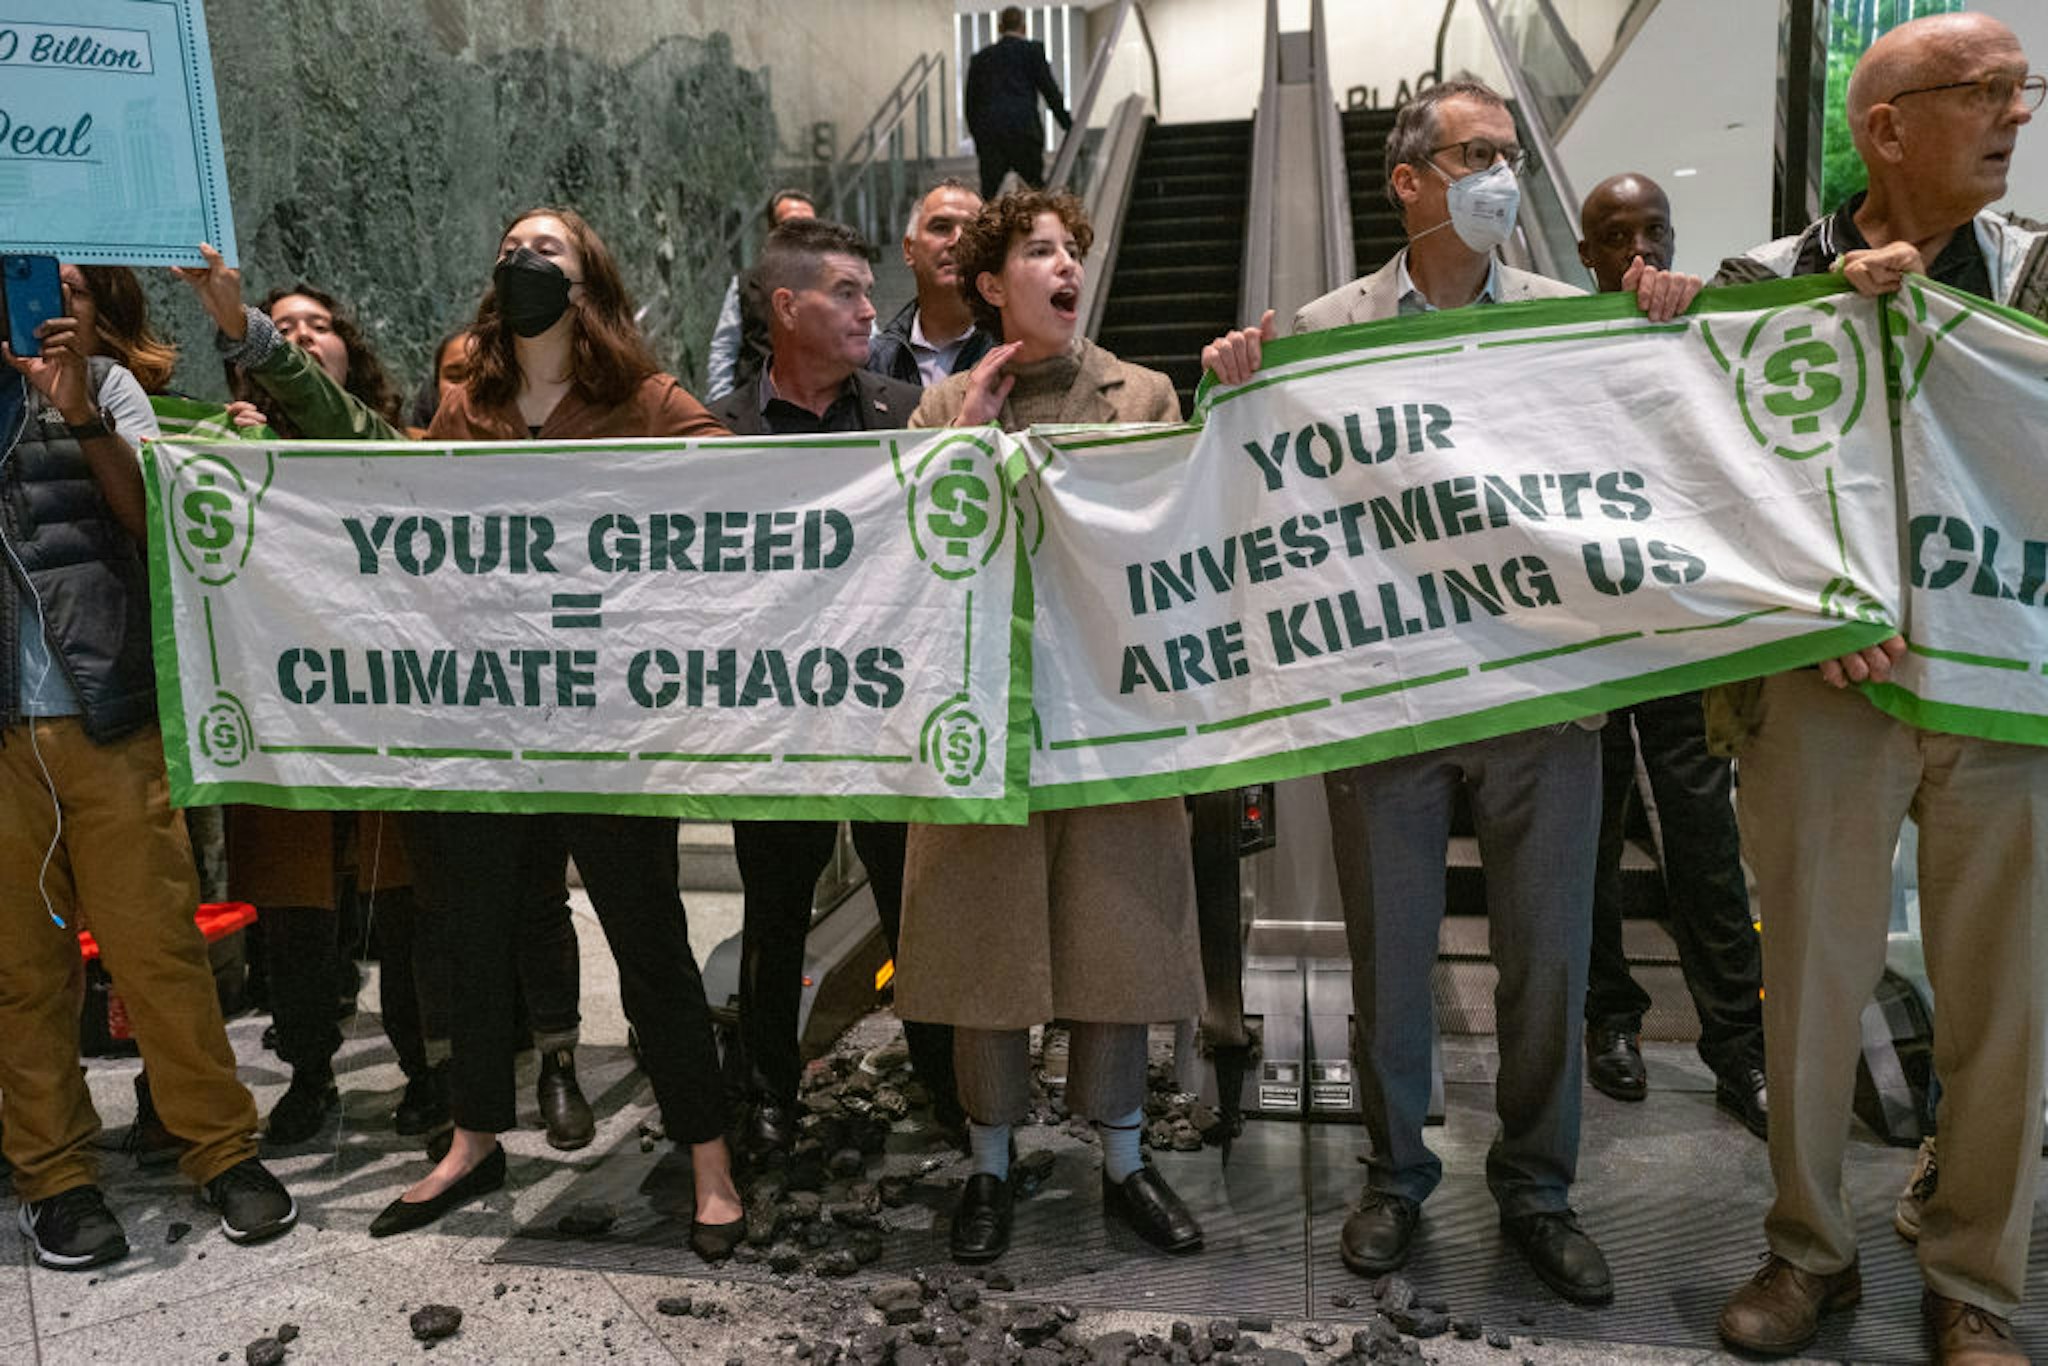 NEW YORK, NEW YORK - OCTOBER 26: Climate activists block an escalator and throw coal on the ground at the New York headquarters of the financial investment firm BlackRock on October 26, 2022 in New York City. The activists, who have been holding protests to mark 10 years sine Hurricane Sandy, were protesting the company's investment in fossil fuels.